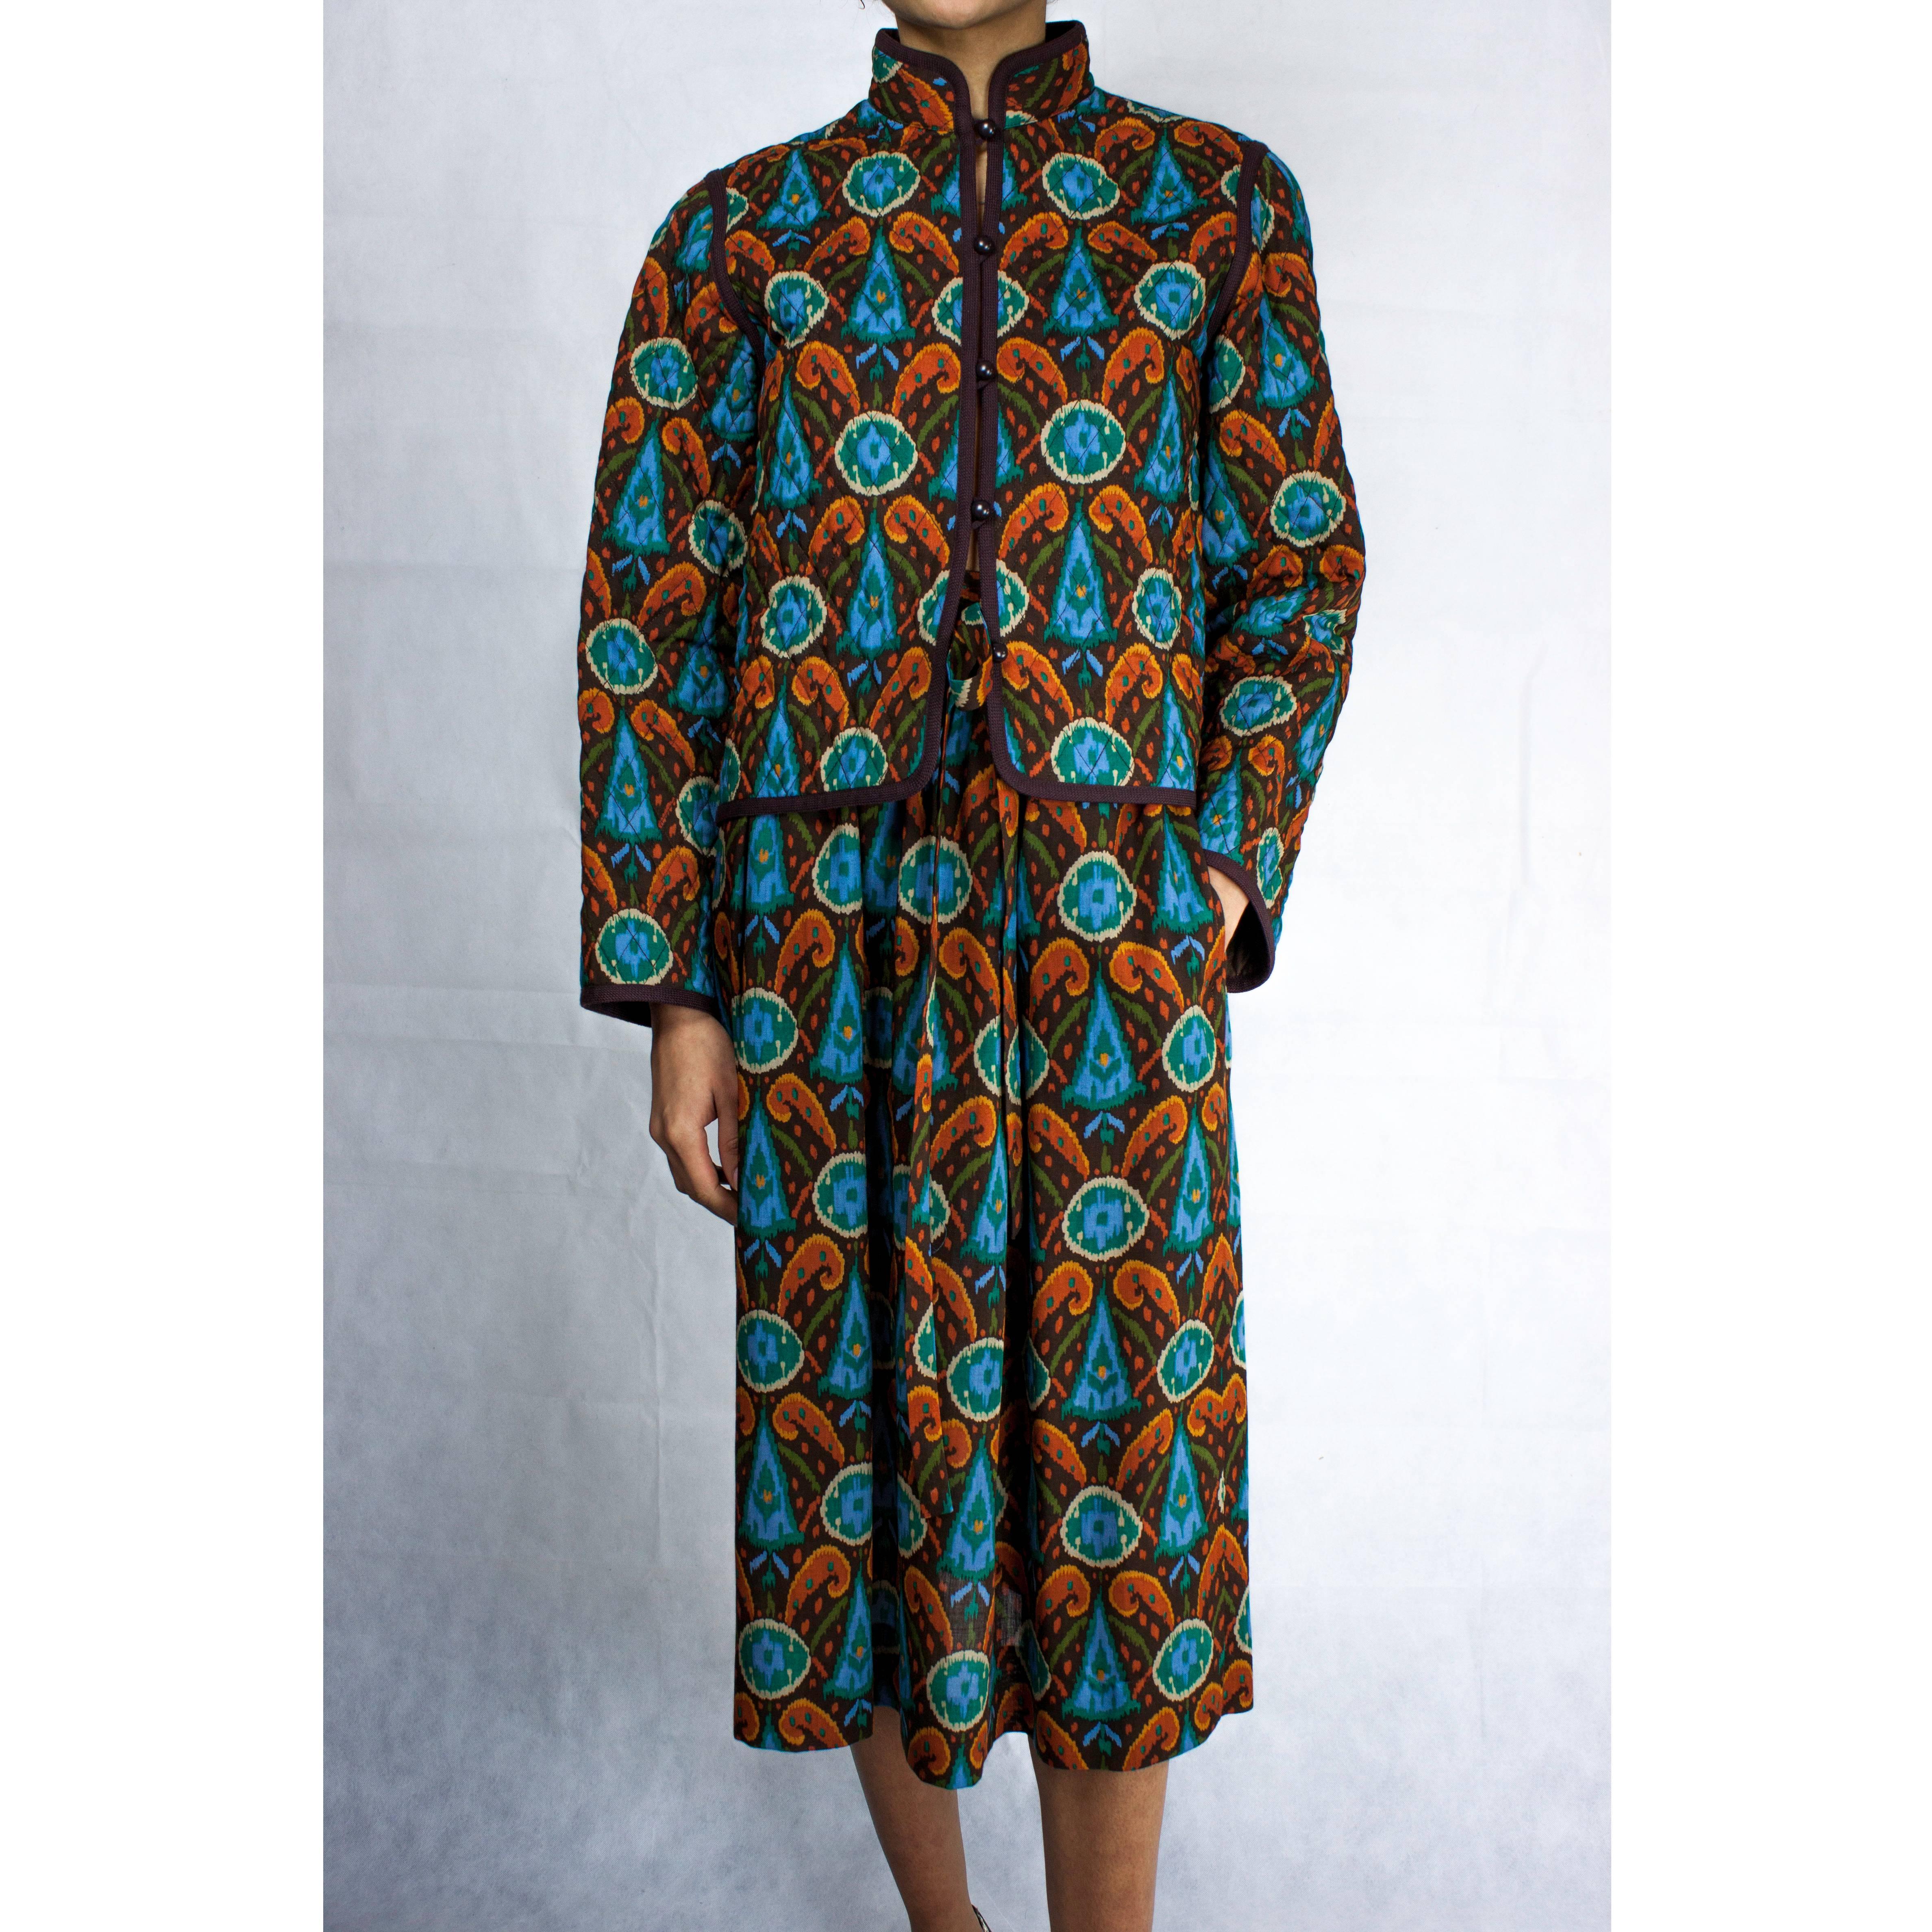 Yves Saint Laurent's 1976 Russian Collection revolutionised the course of fashion around the world.

This 1976 skirt and jacket ensemble perfectly reflects Saint Laurent's interest in folk cultures.  For example, the motifs of the print evoke the